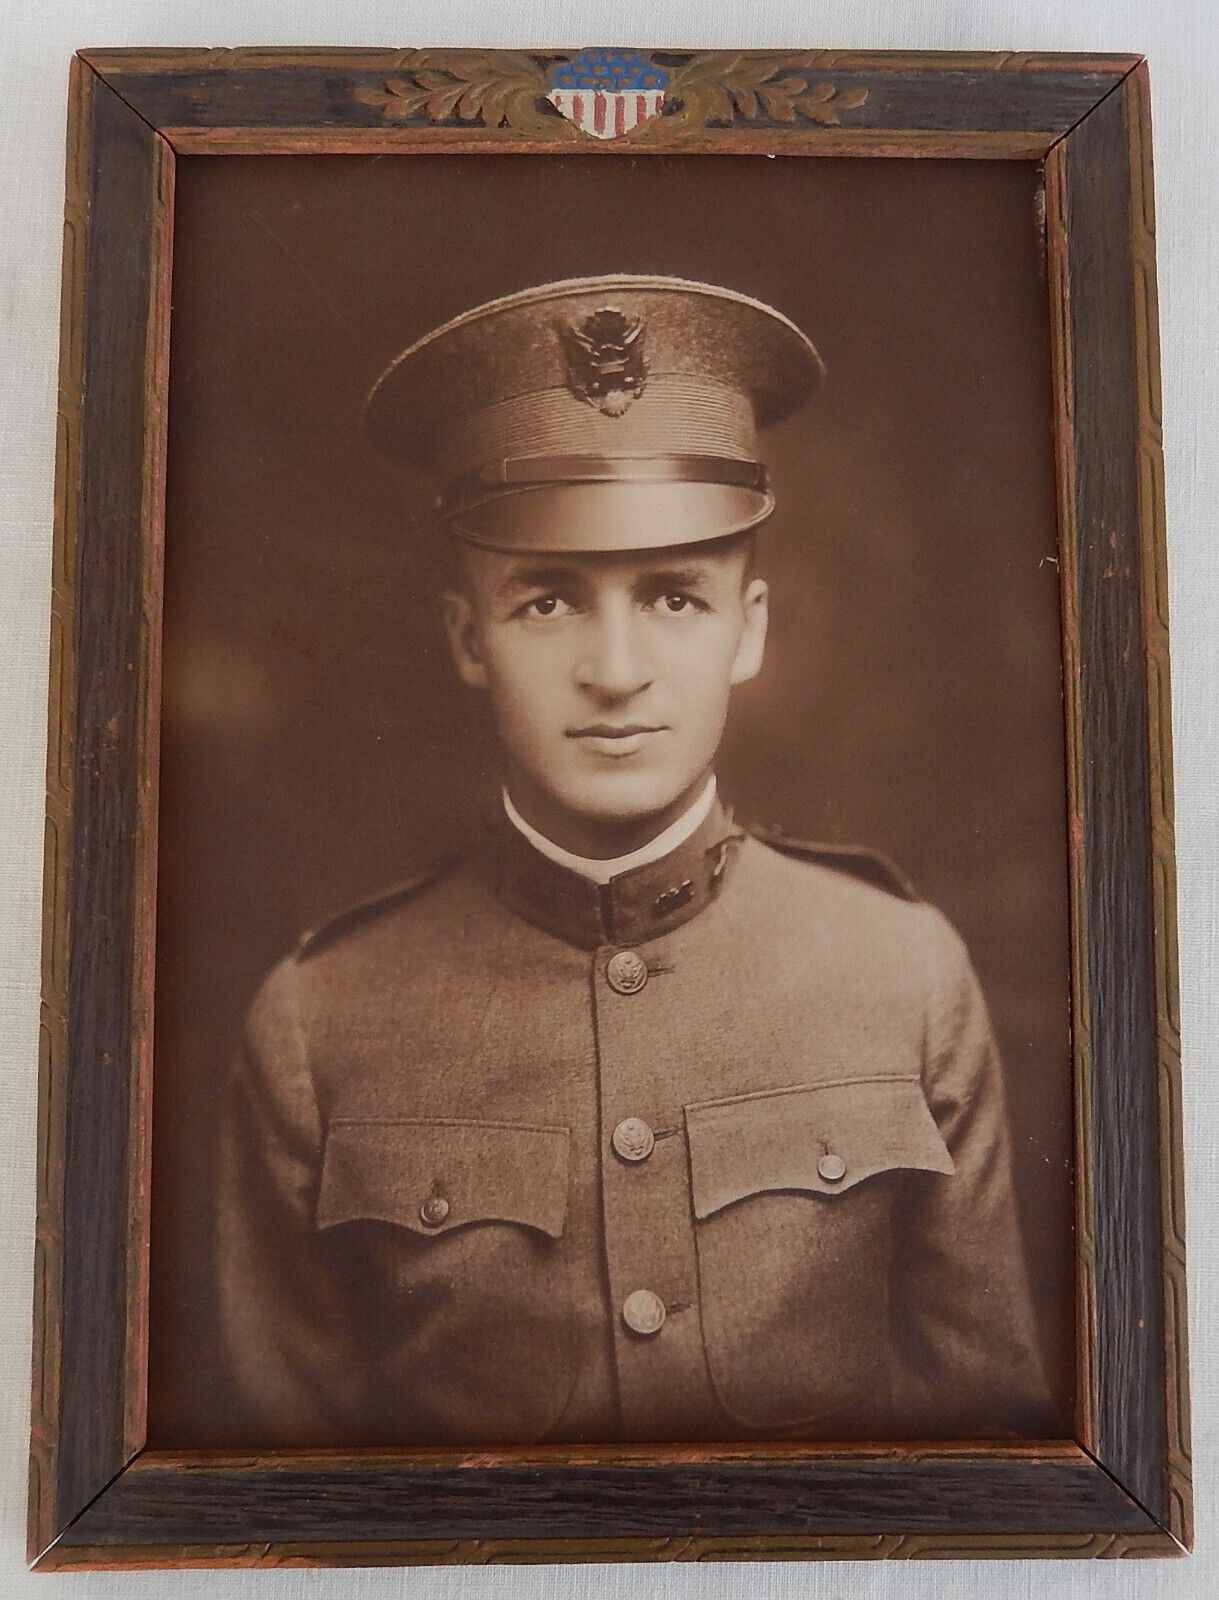 WW1 Photo of Young Soldier in Uniform in a Patriotic Frame